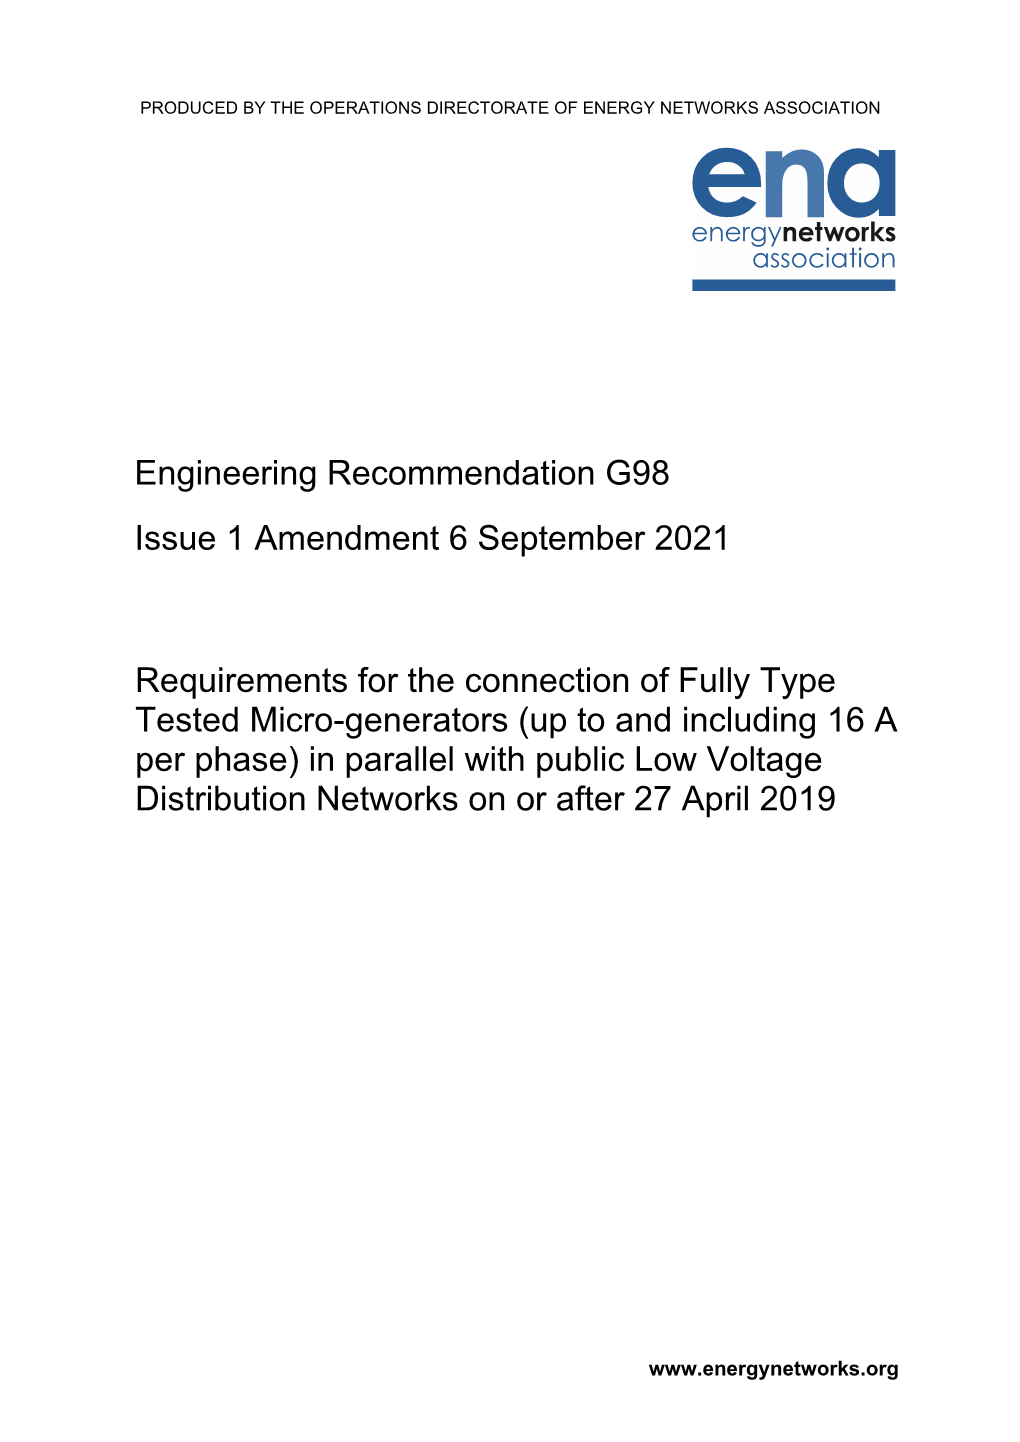 Engineering Recommendation G98 Issue 1 Amendment 6 September 2021